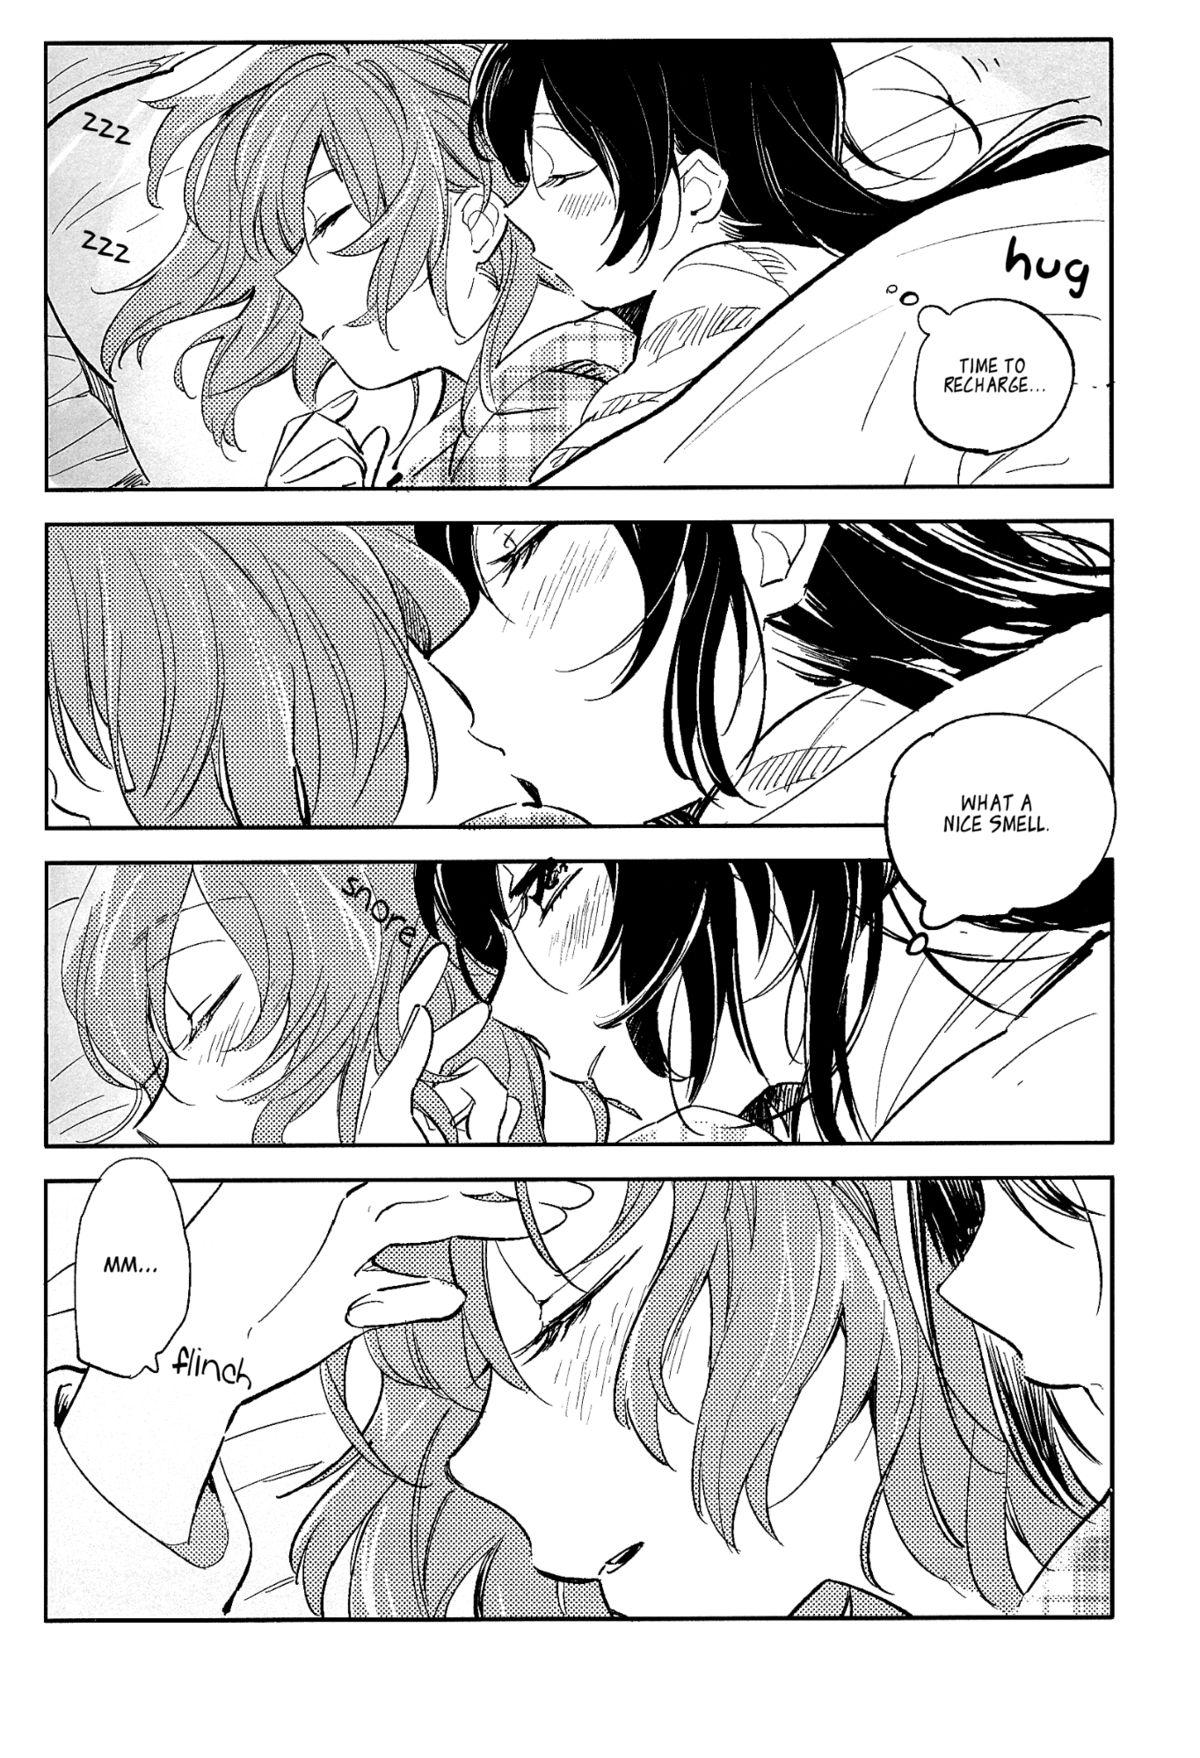 Spit Koibito no Jikan | Time for Lovers - Love live Beauty - Page 6